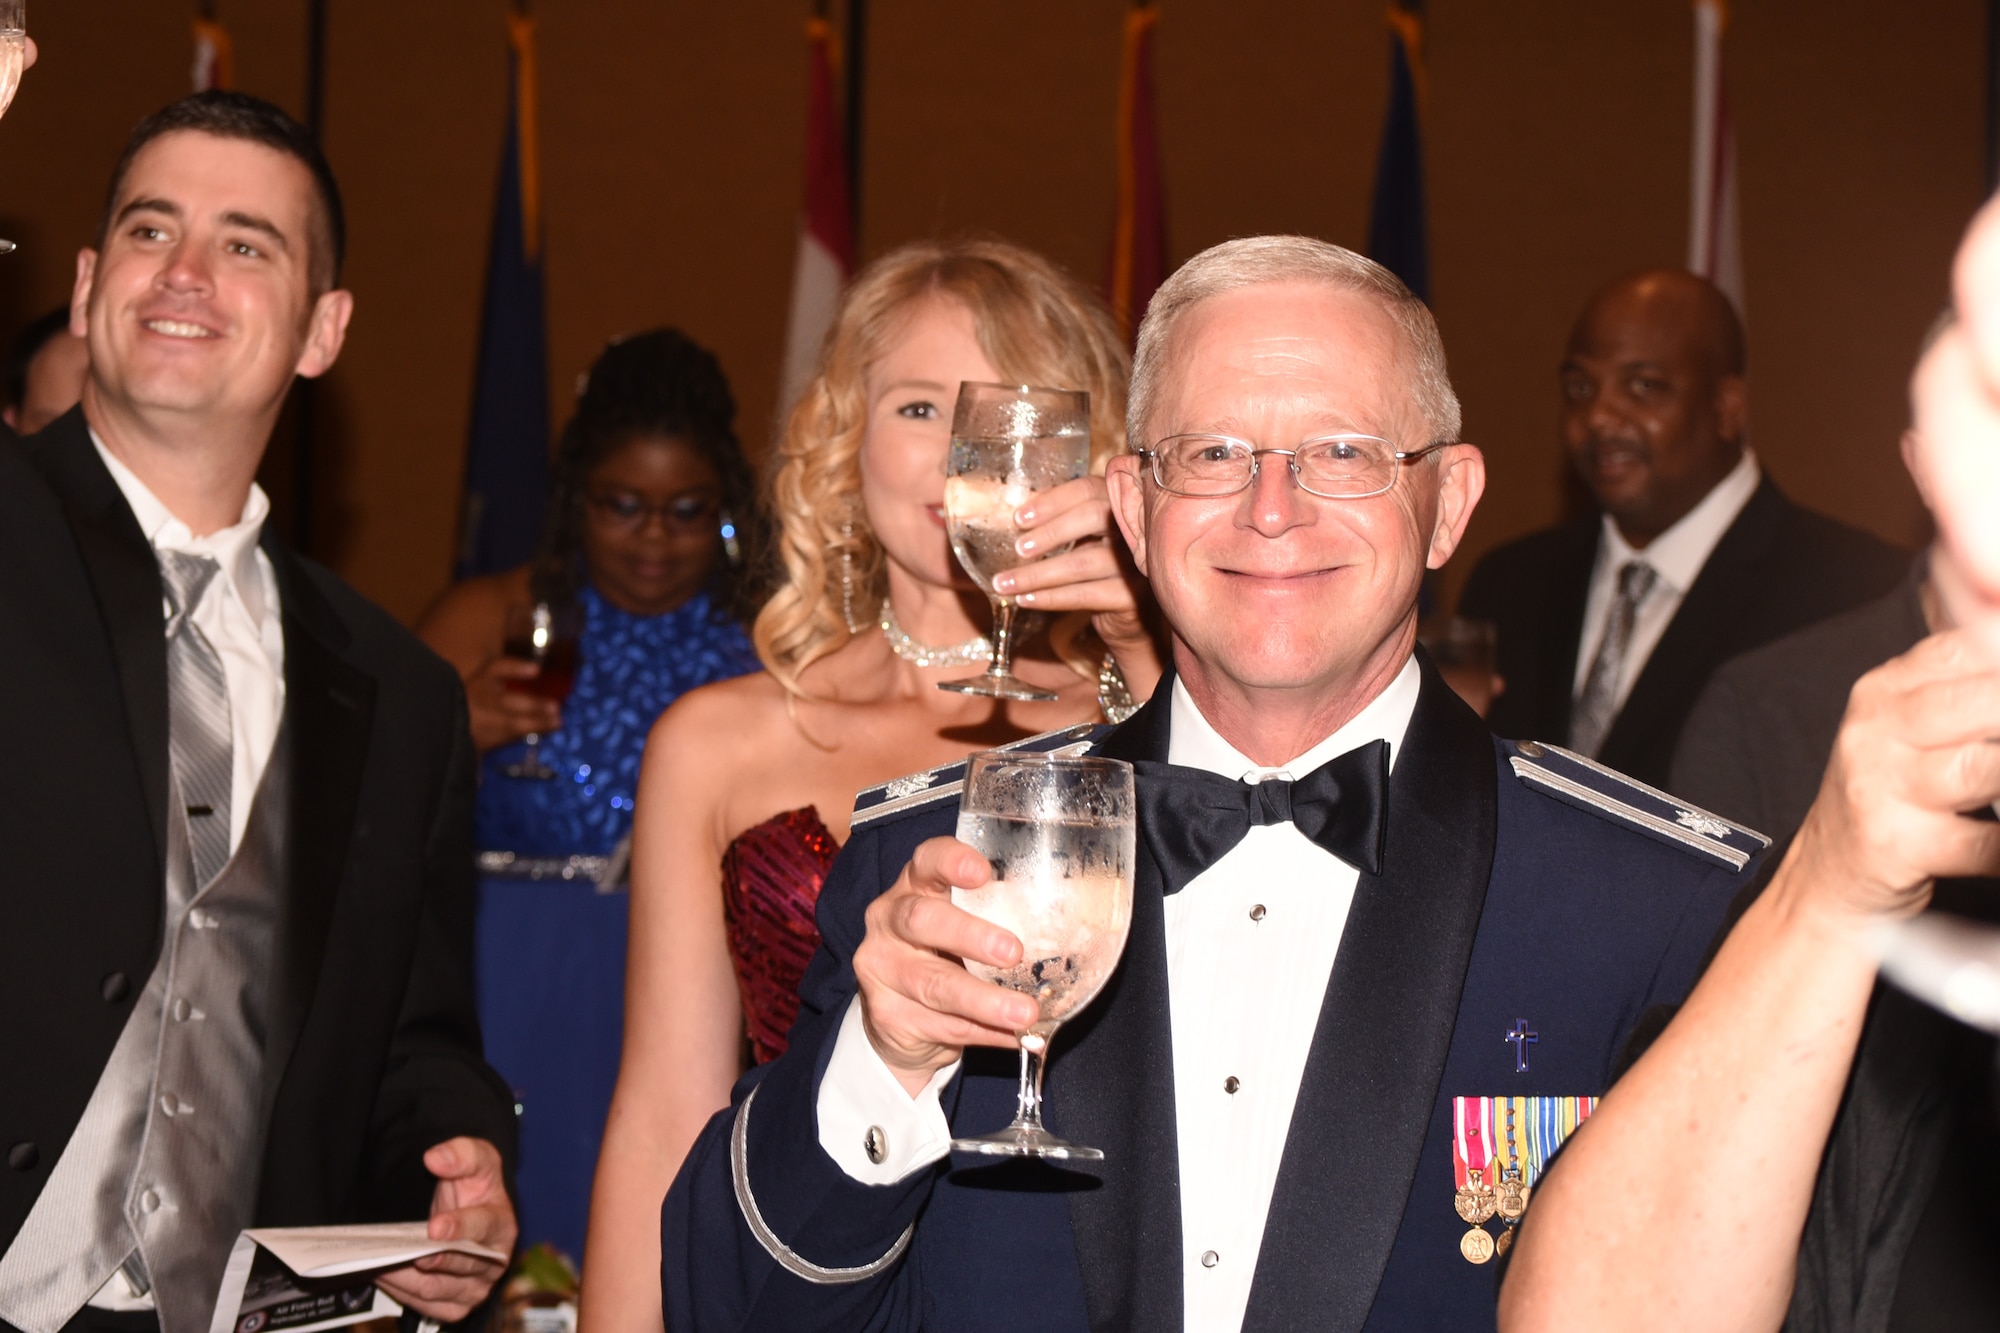 While attending the Air Force Ball last Saturday, Chaplain (Lt. Col.) Sam Tucker raised his glass during the toasts.